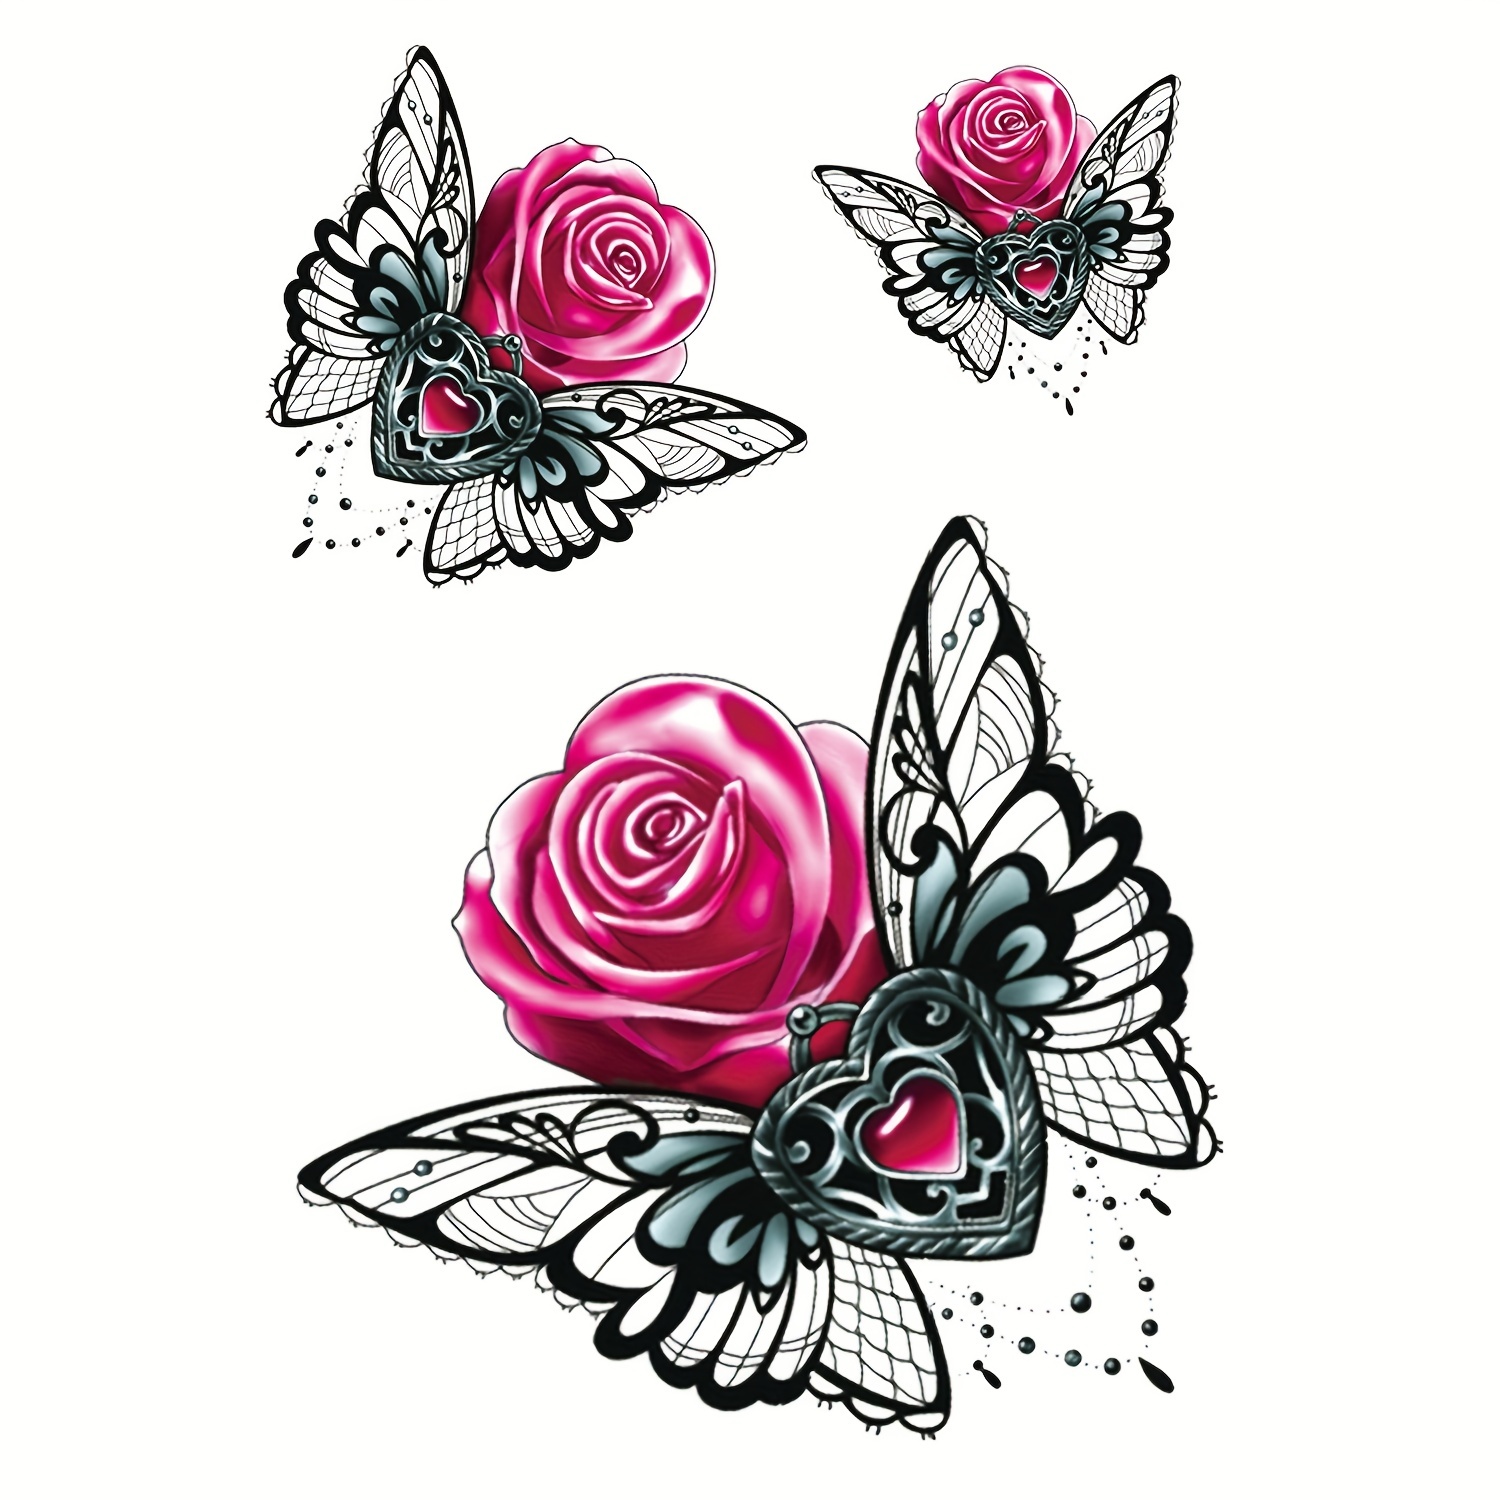 

1 Sheet 3 Pattern Waterproof Half Arm Temporary Tattoo Sticker - Butterfly, Rose, And Heart Designs For Women And Ladies - Long-lasting And Hypoallergenic Fake Tattoo Sticker